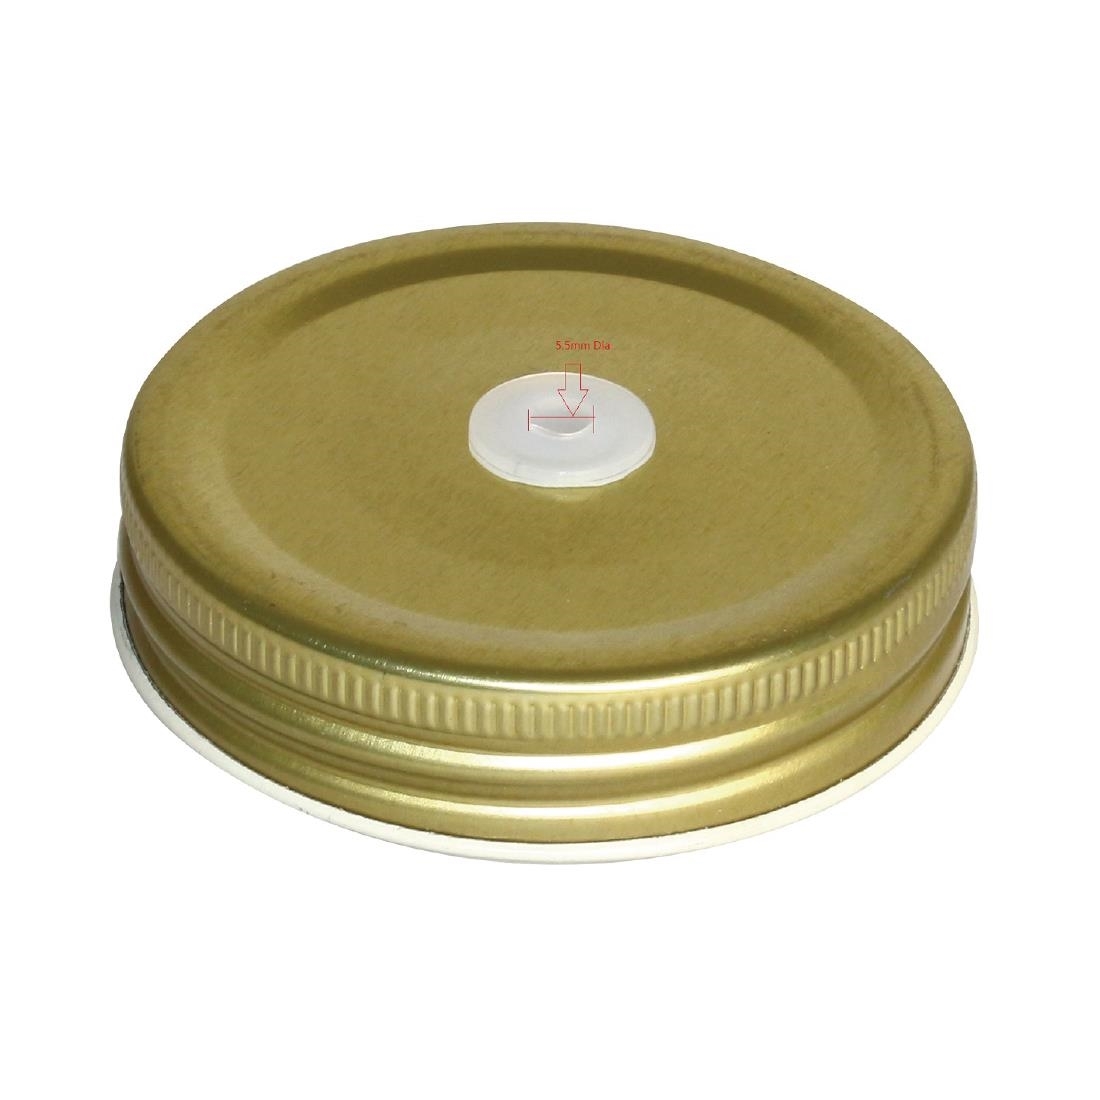 Olympia Jam Jar Lids with Straw Hole (Pack of 12)